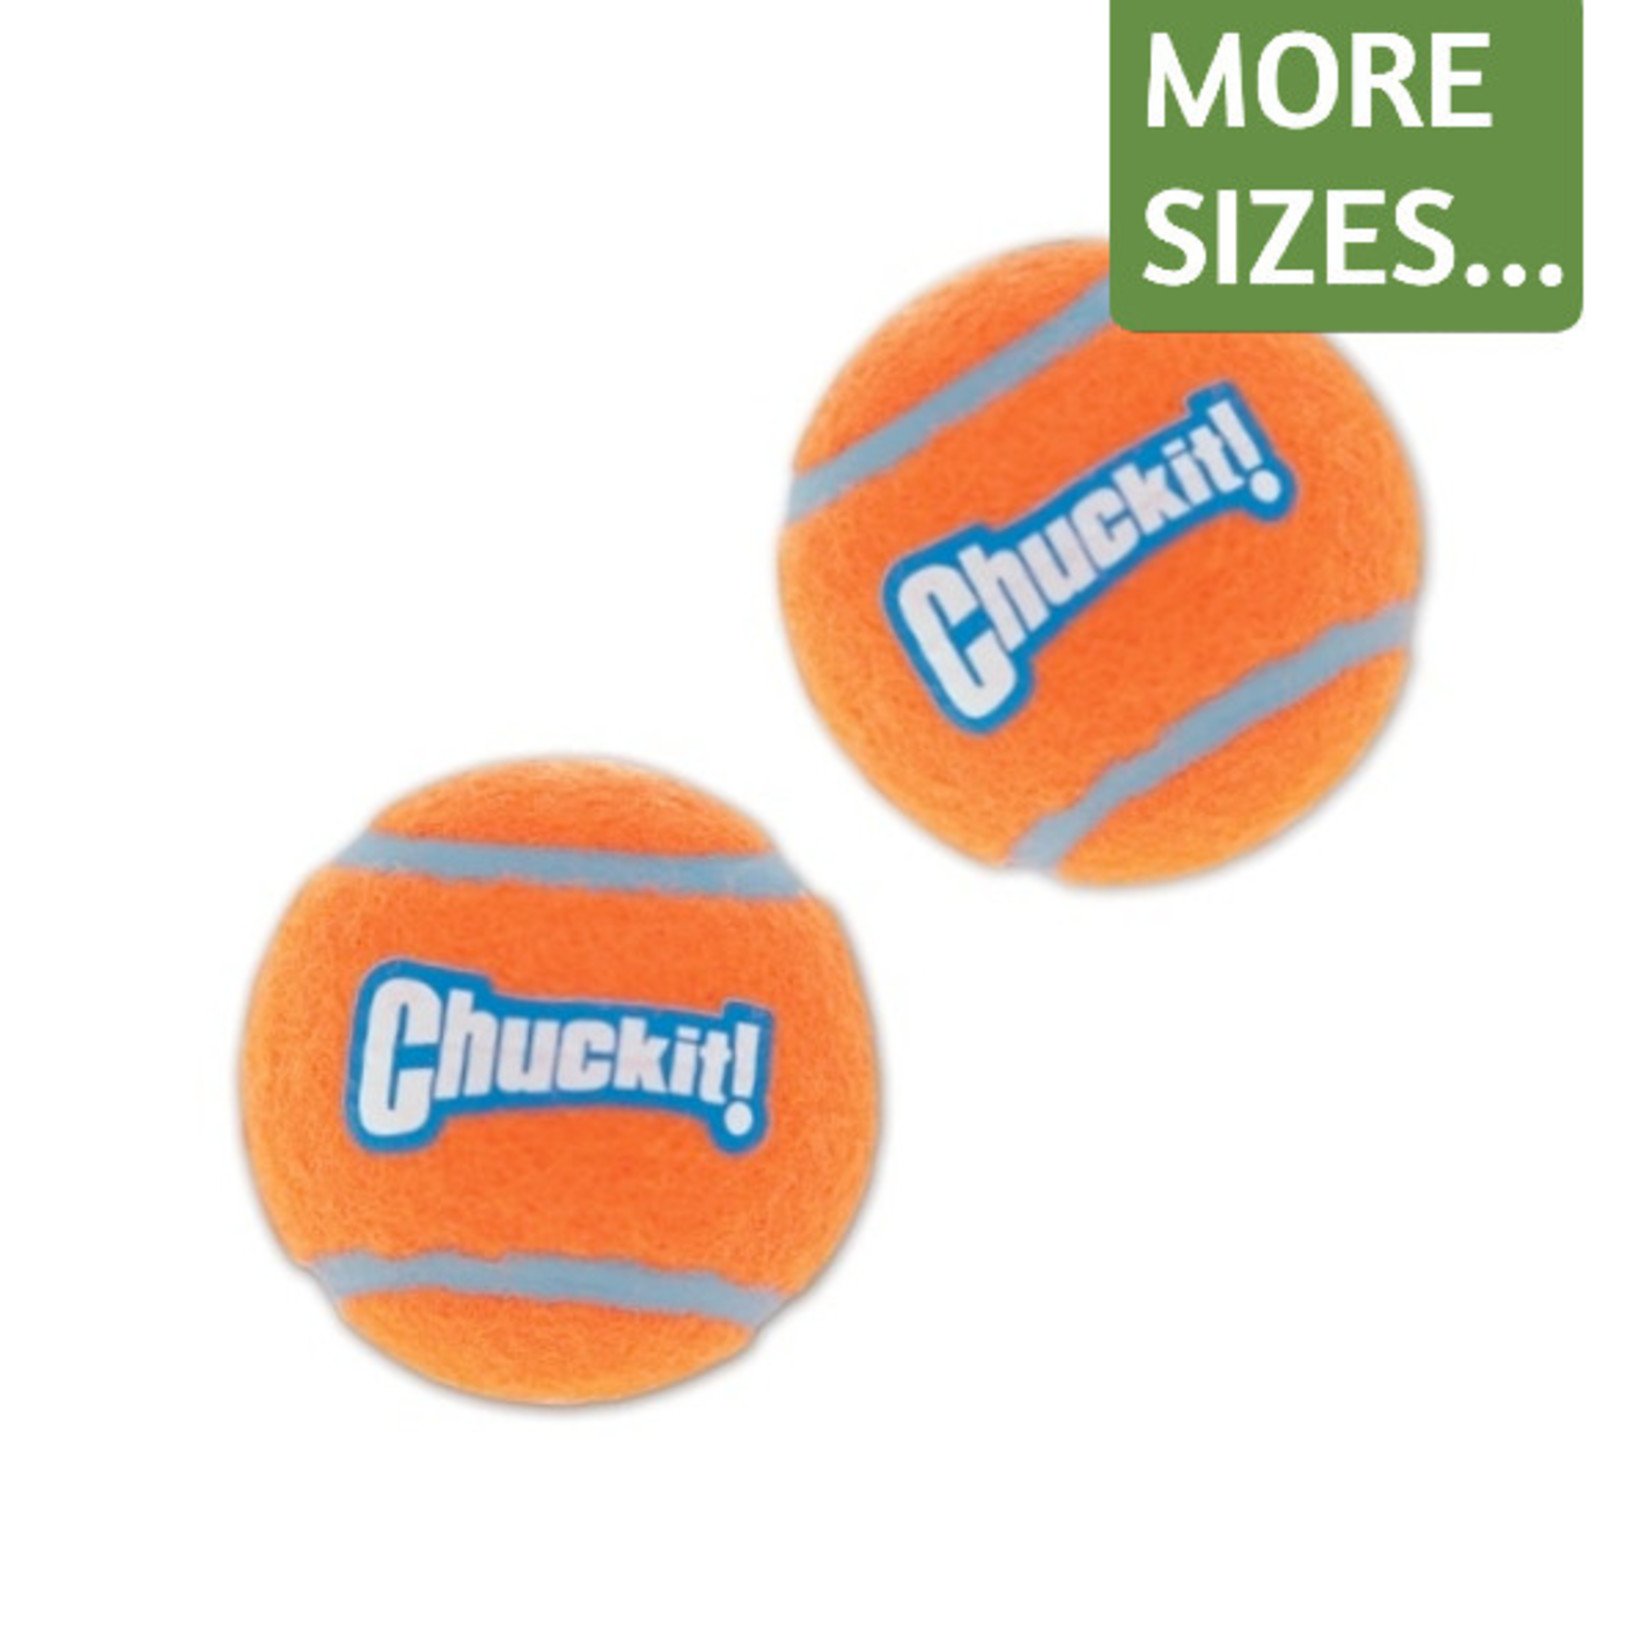 Chuckit Chuckit! Tennis Balls Various Sizes for Solo Play or Ball Launchers